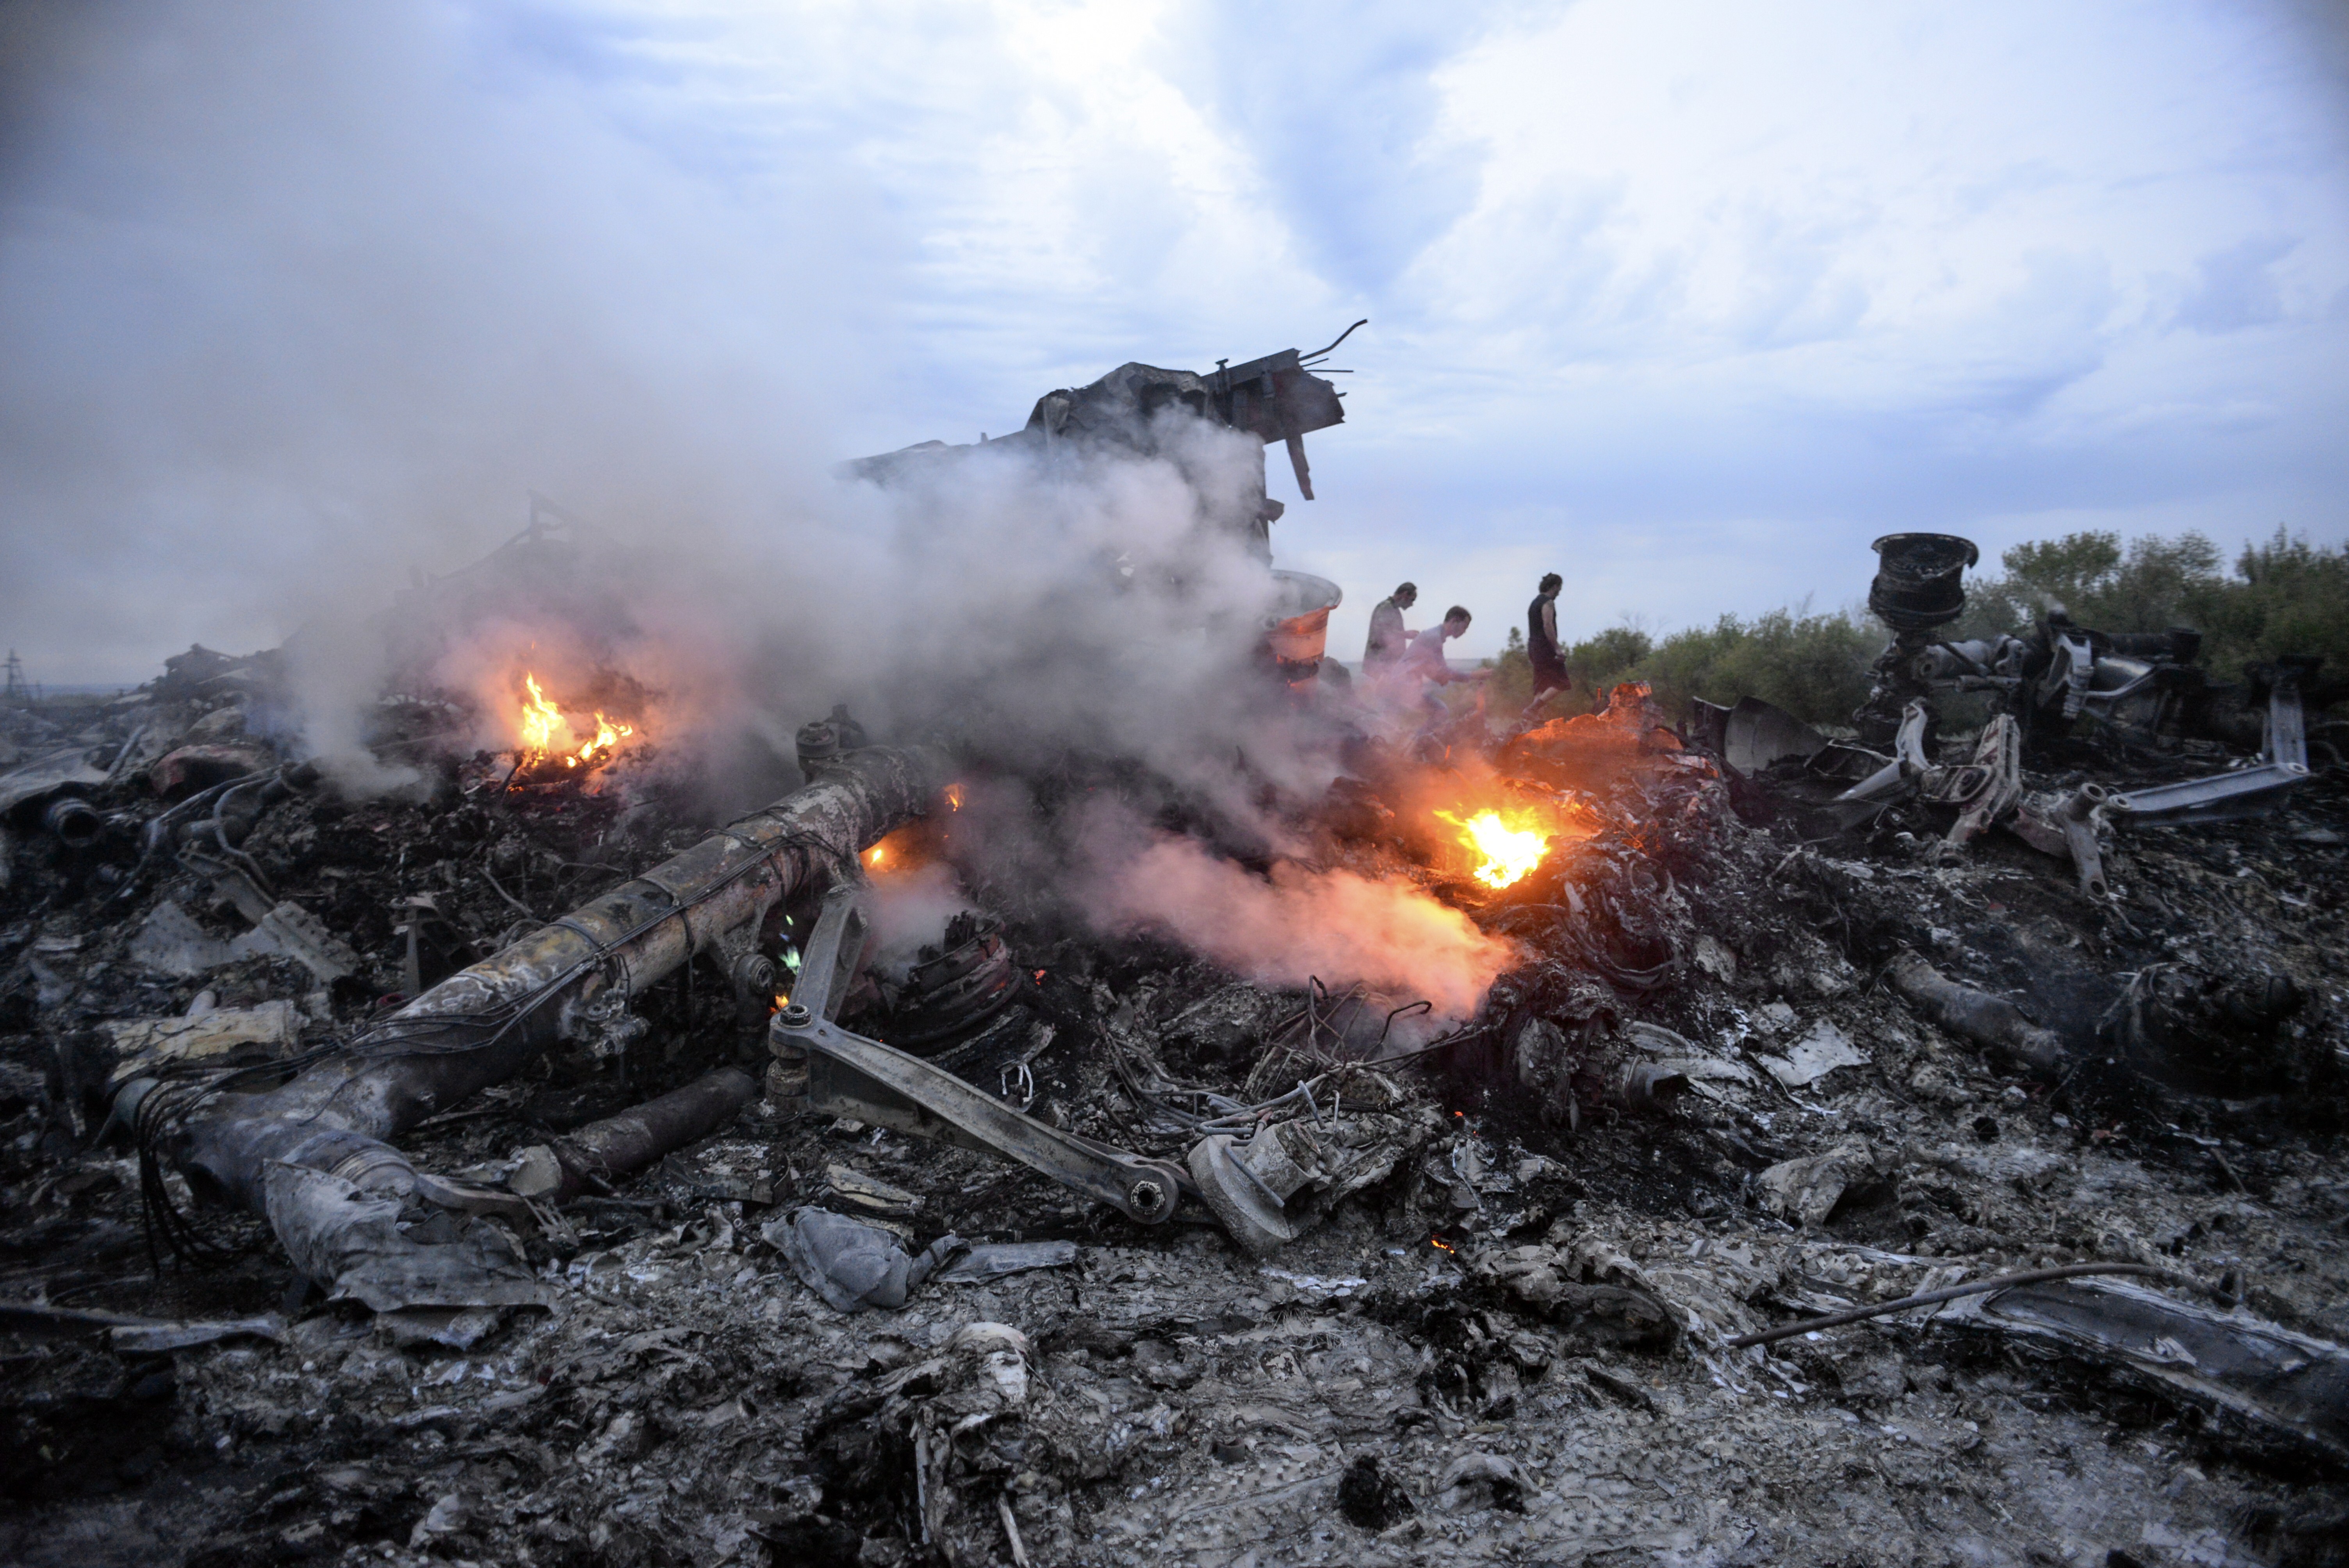 Debris from the crashed Malaysia Airlines flight MH17 is seen near Donetsk, Ukraine, in 2014. Photo: EPA